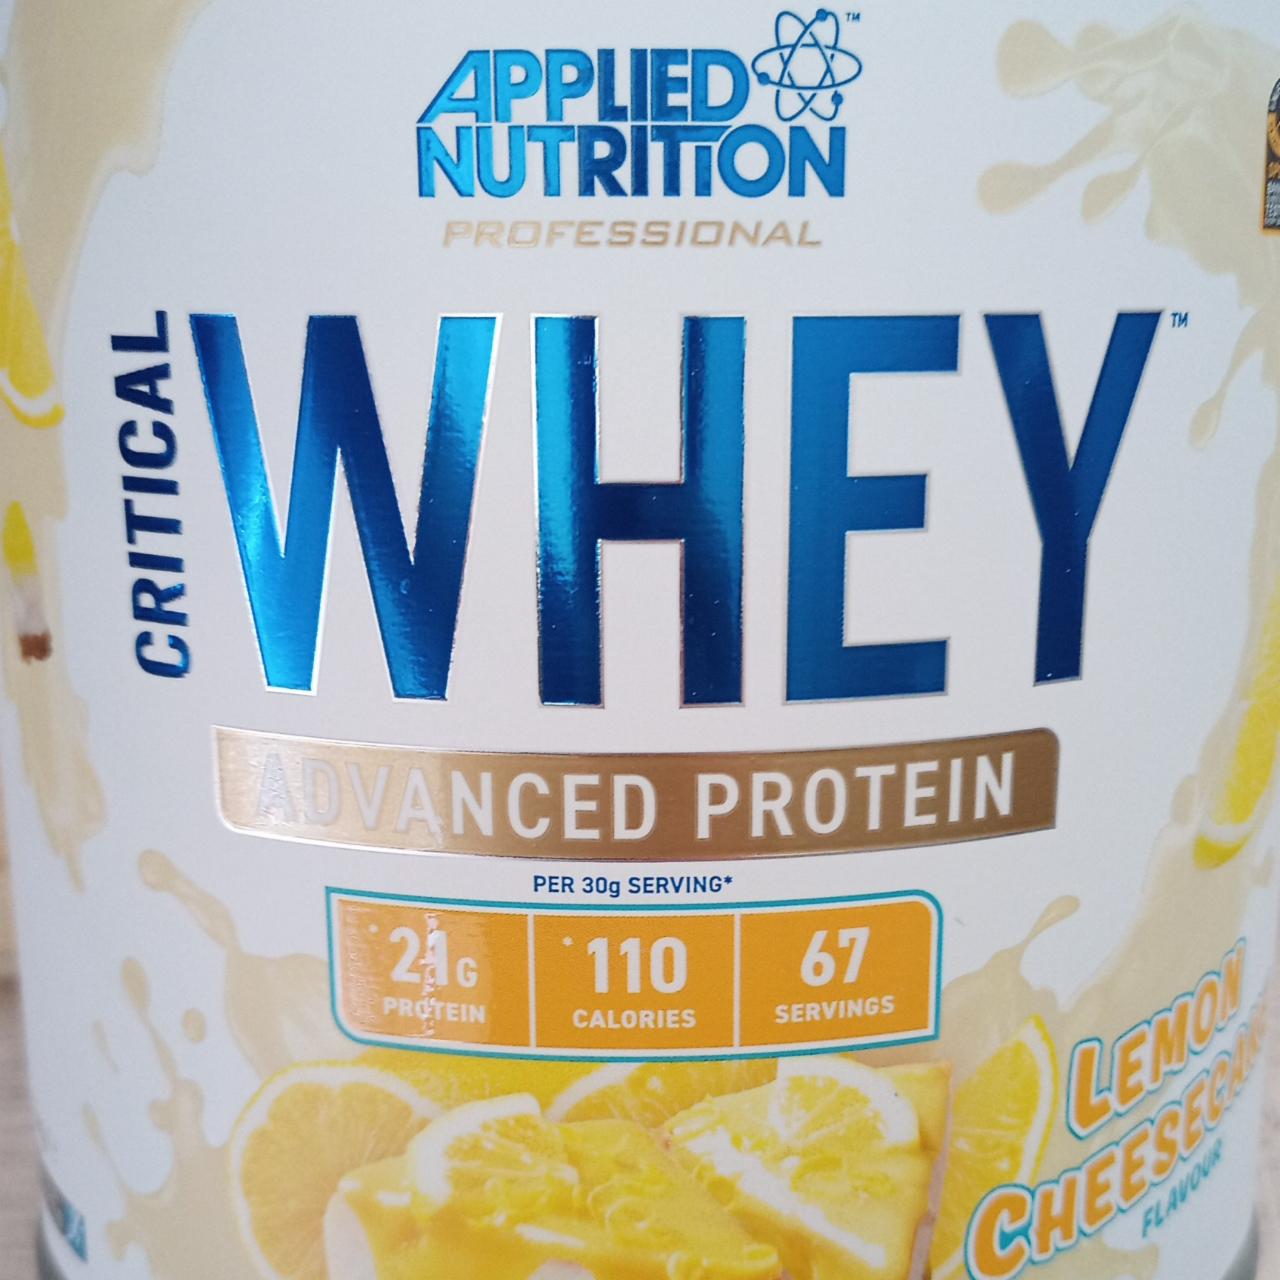 Fotografie - Critical whey advanced protein lemon cheesecake Applied nutrition